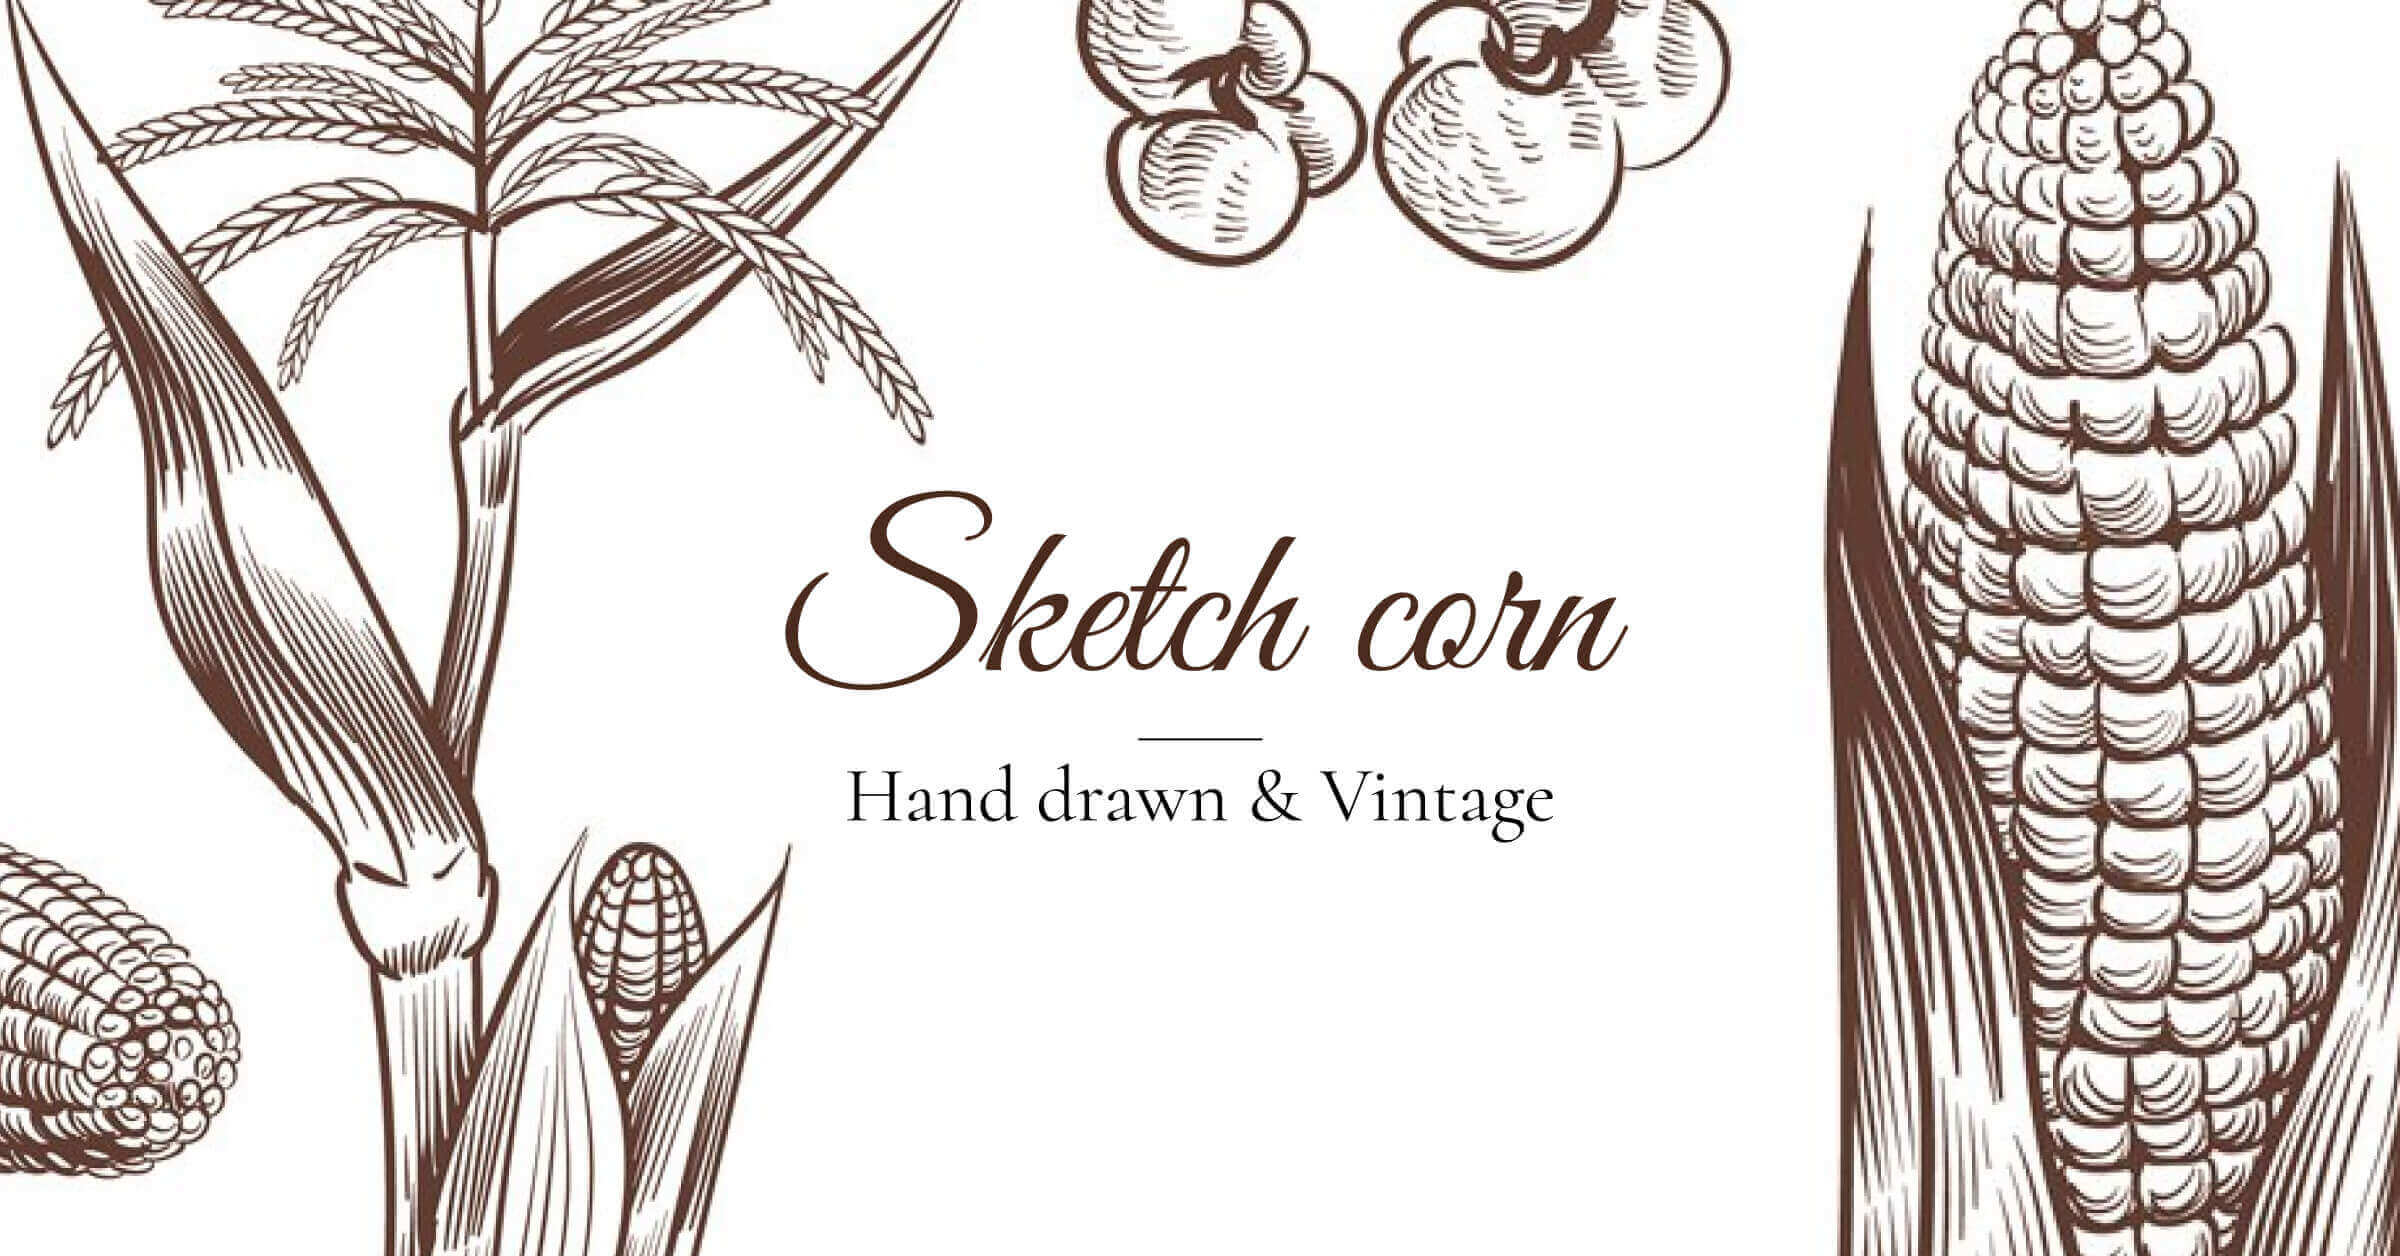 Sketch corn by hand drawn and vintage.